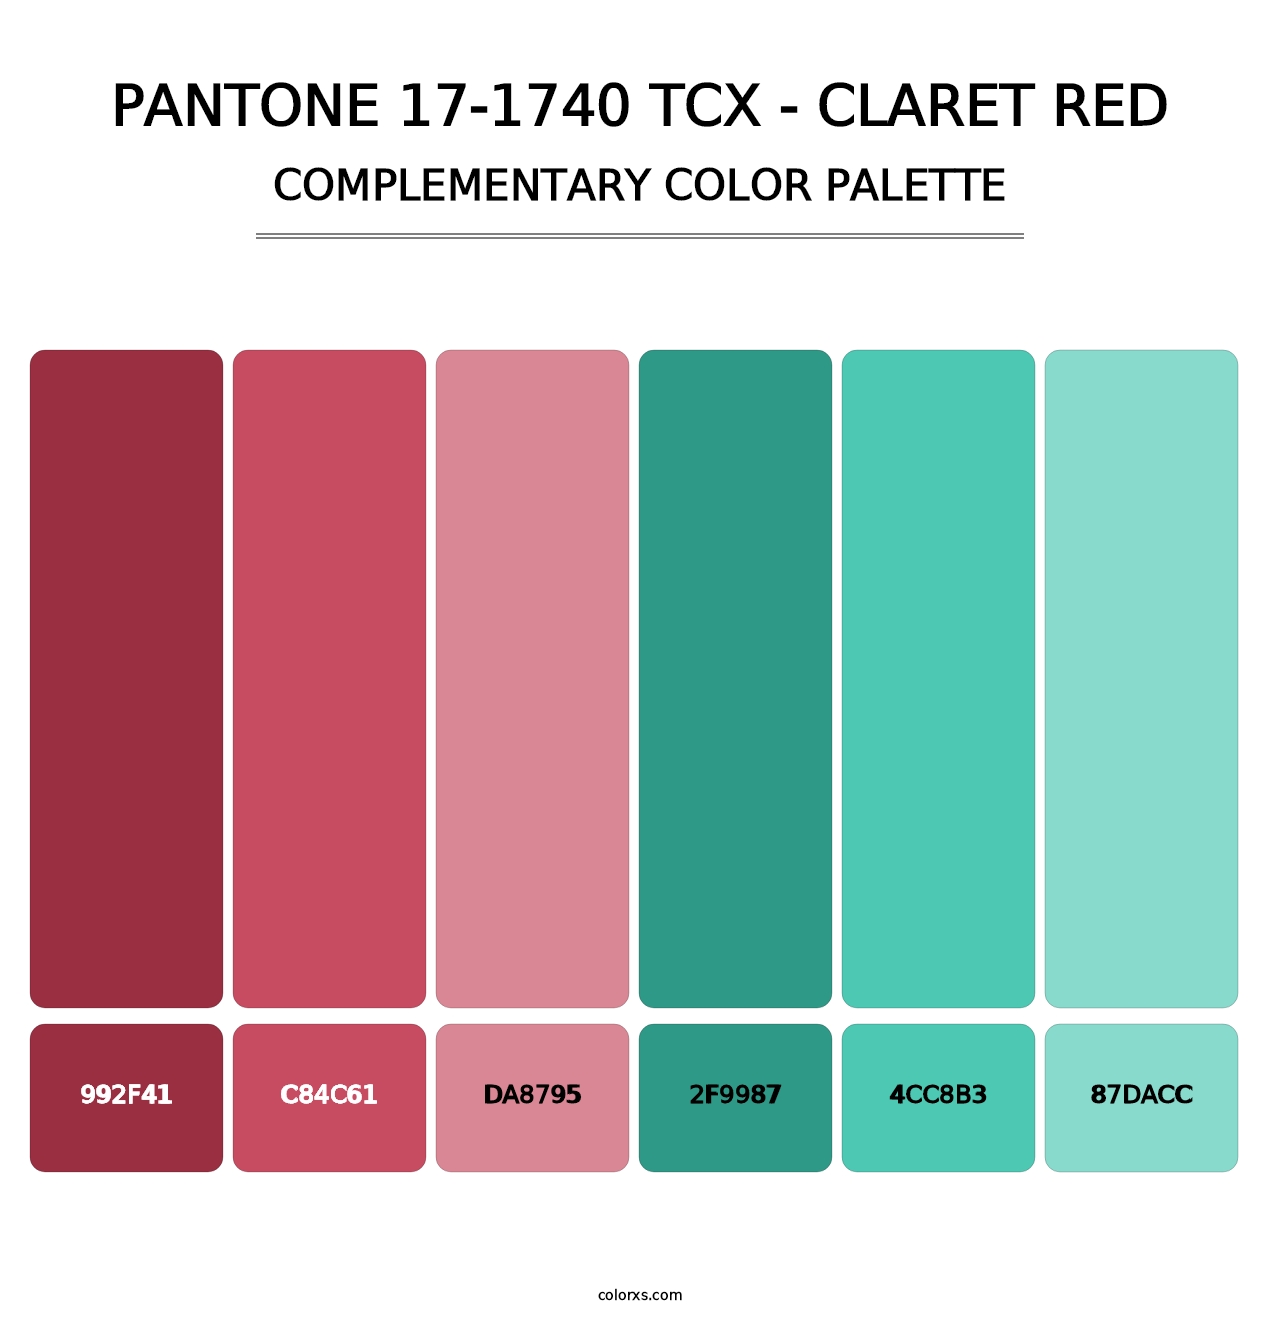 PANTONE 17-1740 TCX - Claret Red - Complementary Color Palette